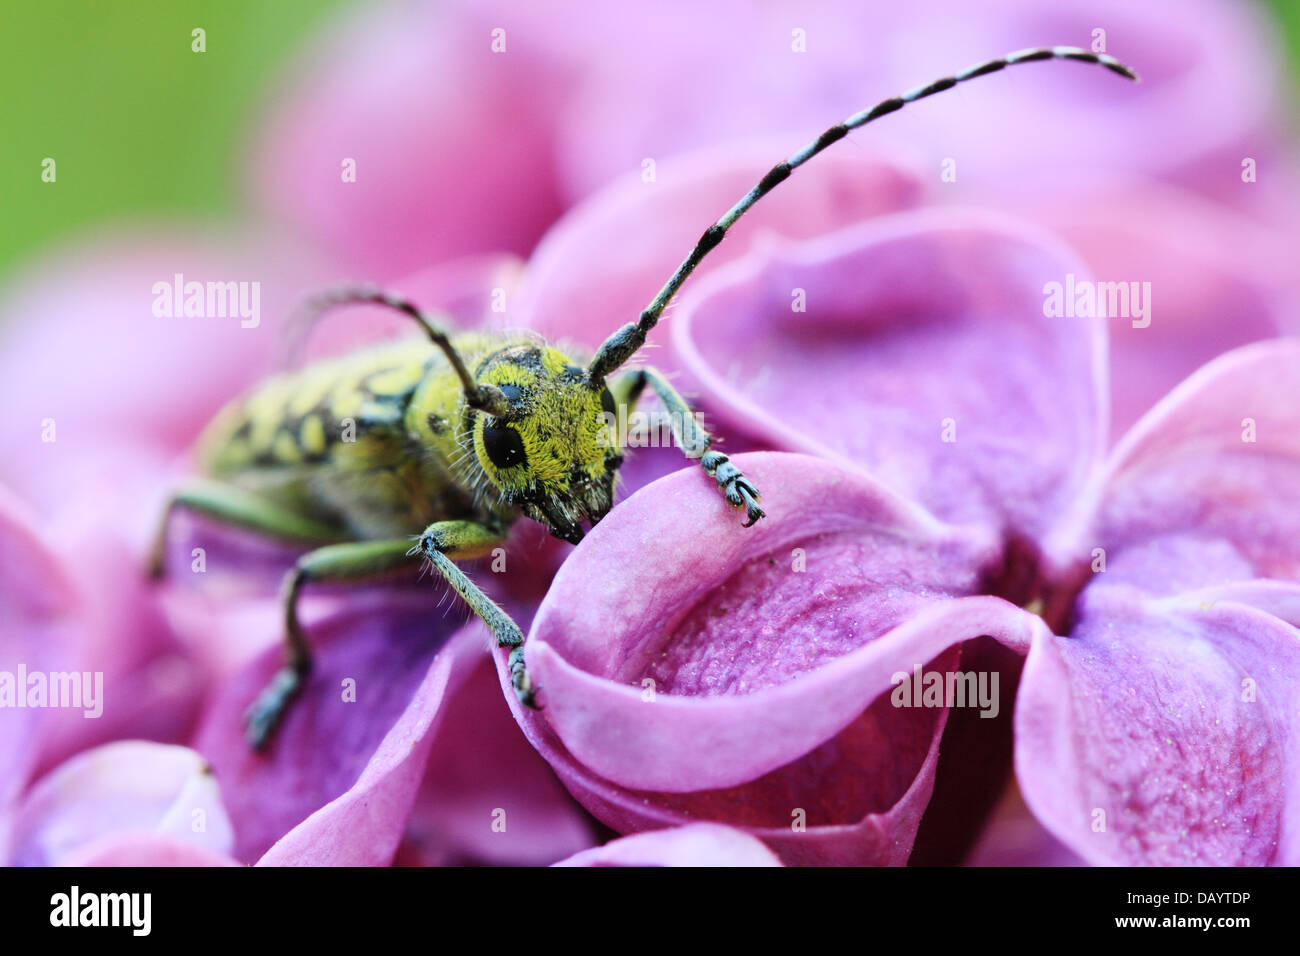 The_colourful_longhorn_beetle_species_Sa